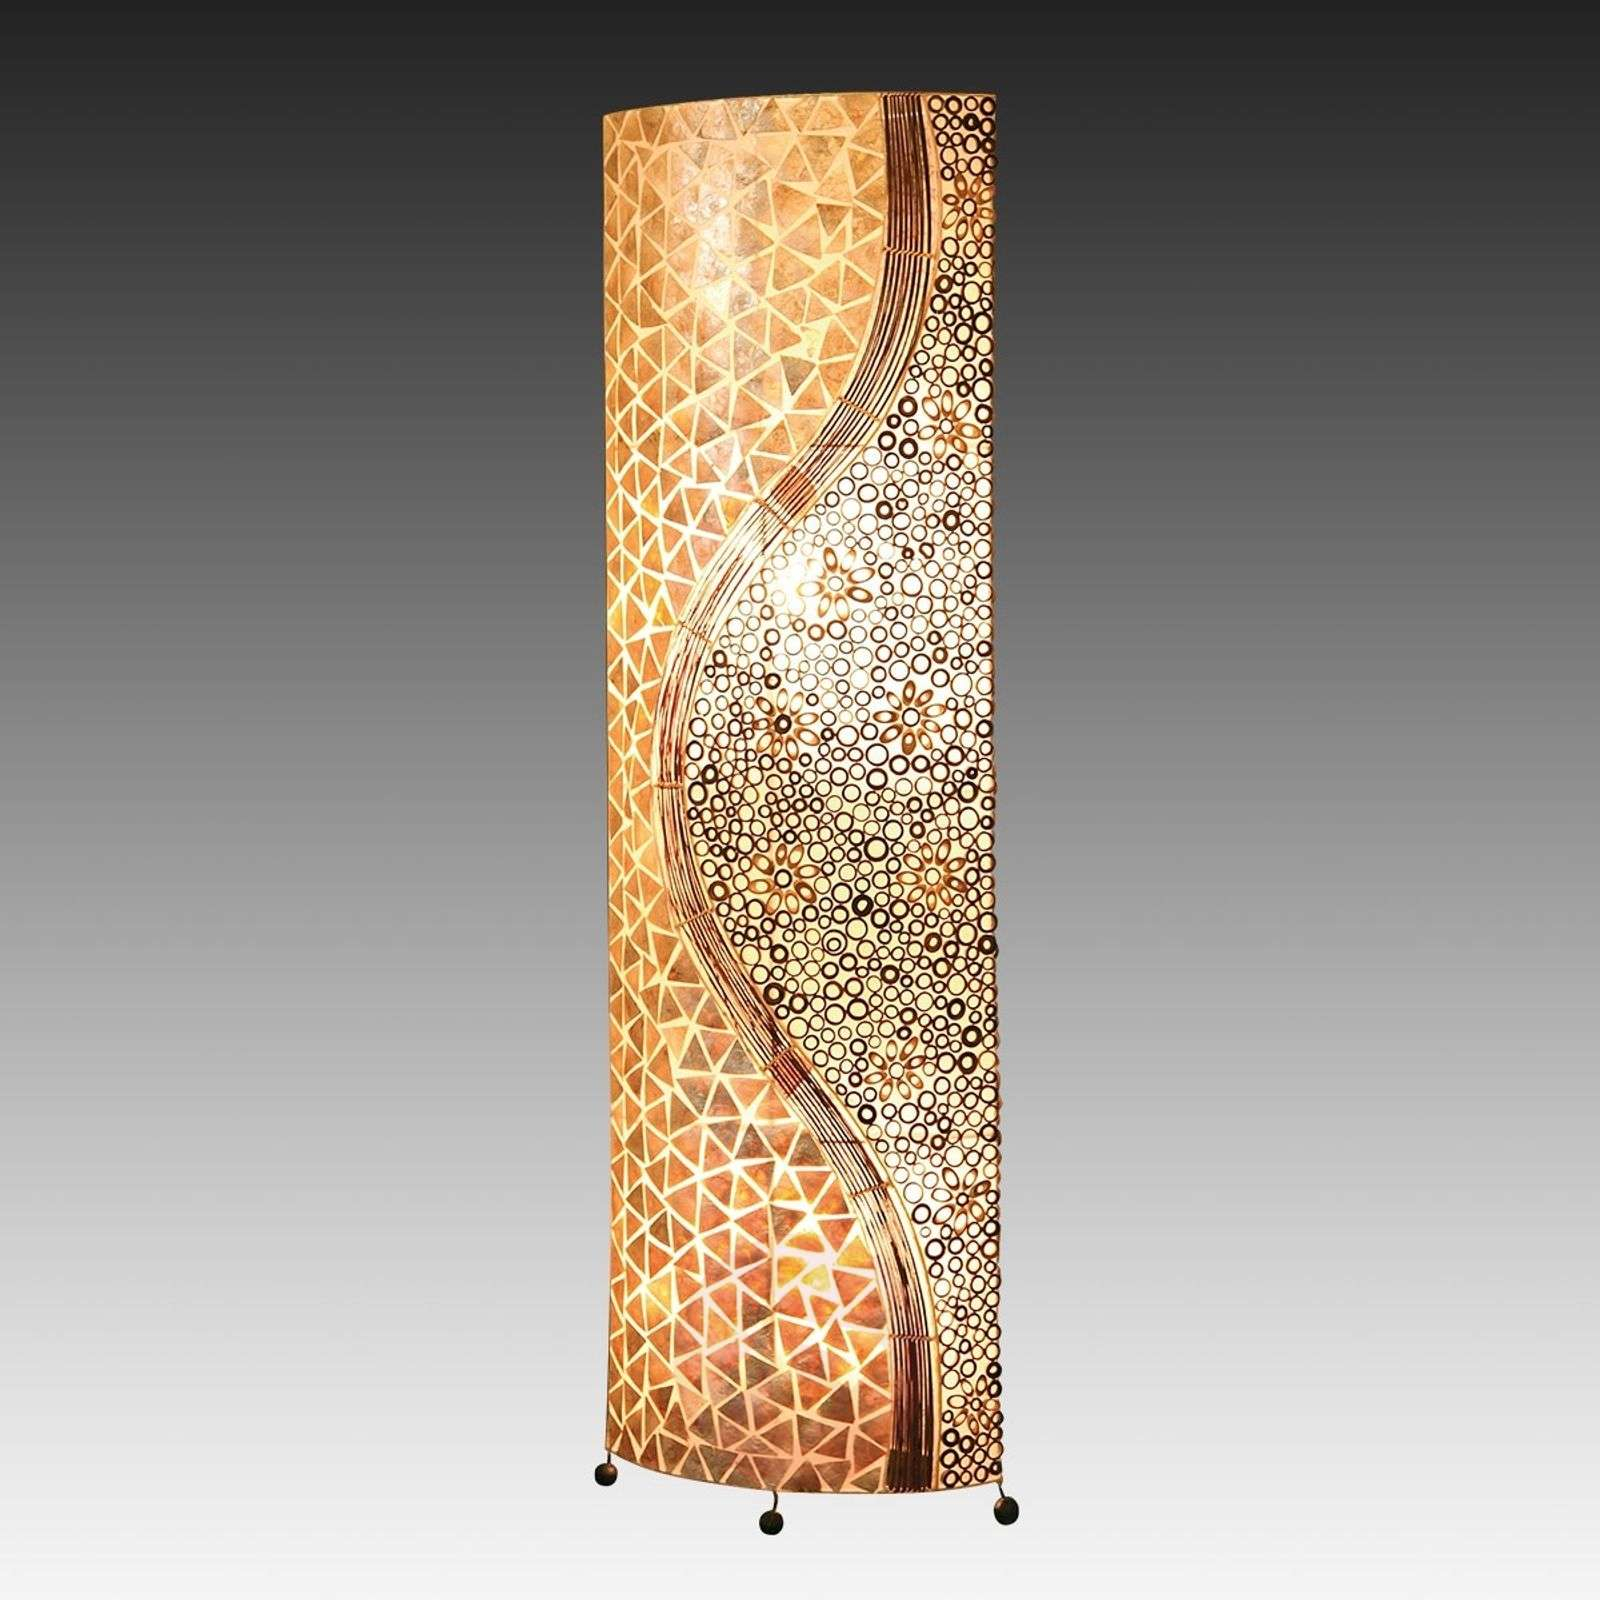 Bali Ethnic Look Oval Mother Of Pearl Floor Lamp throughout dimensions 1600 X 1600